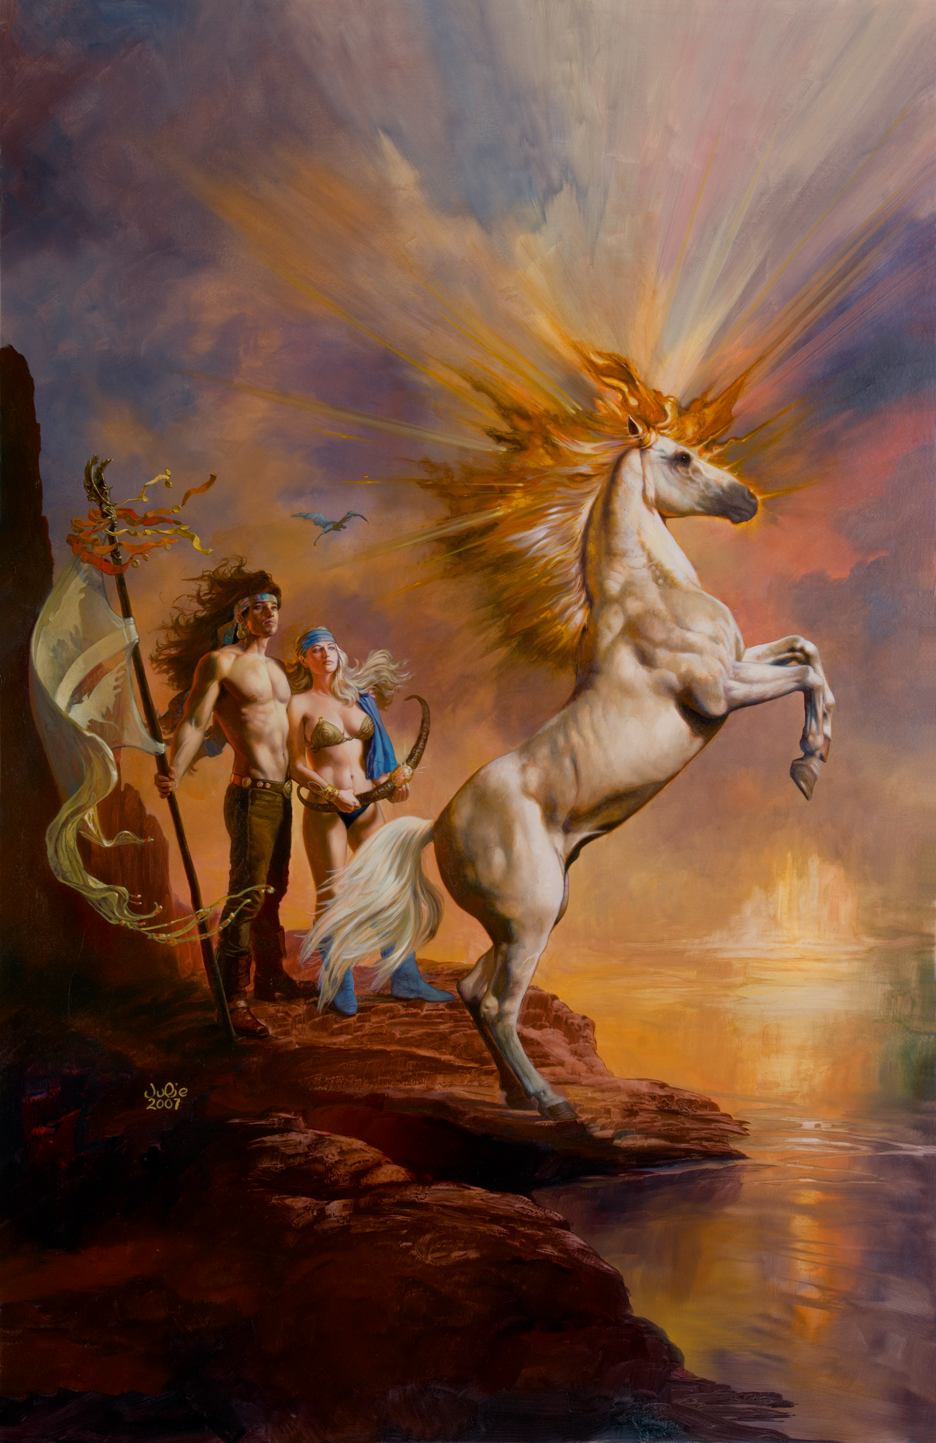 Return To Freedom - Boris Vallejo and Julie Bell